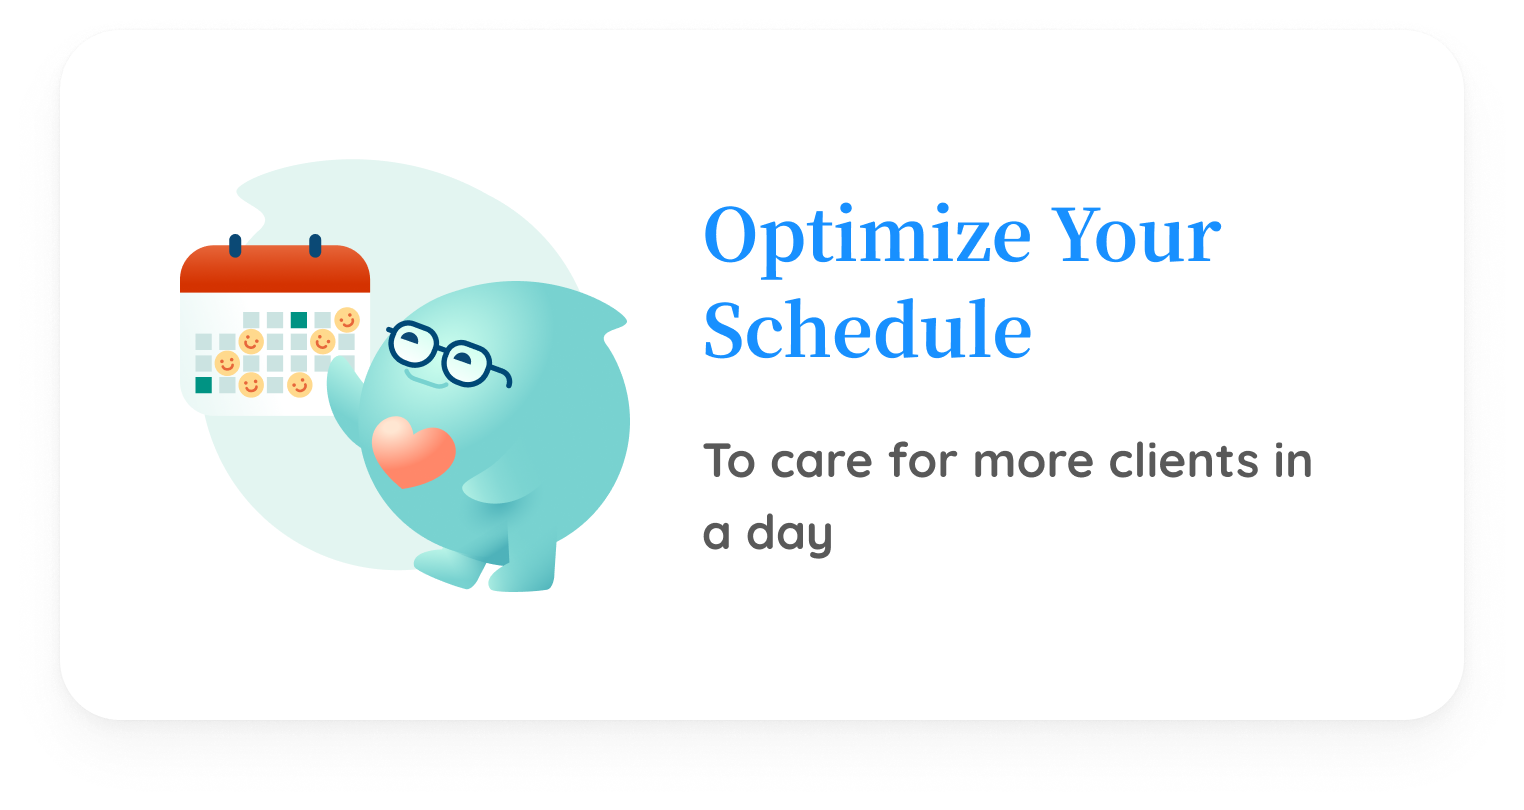 Optimize Your Schedule